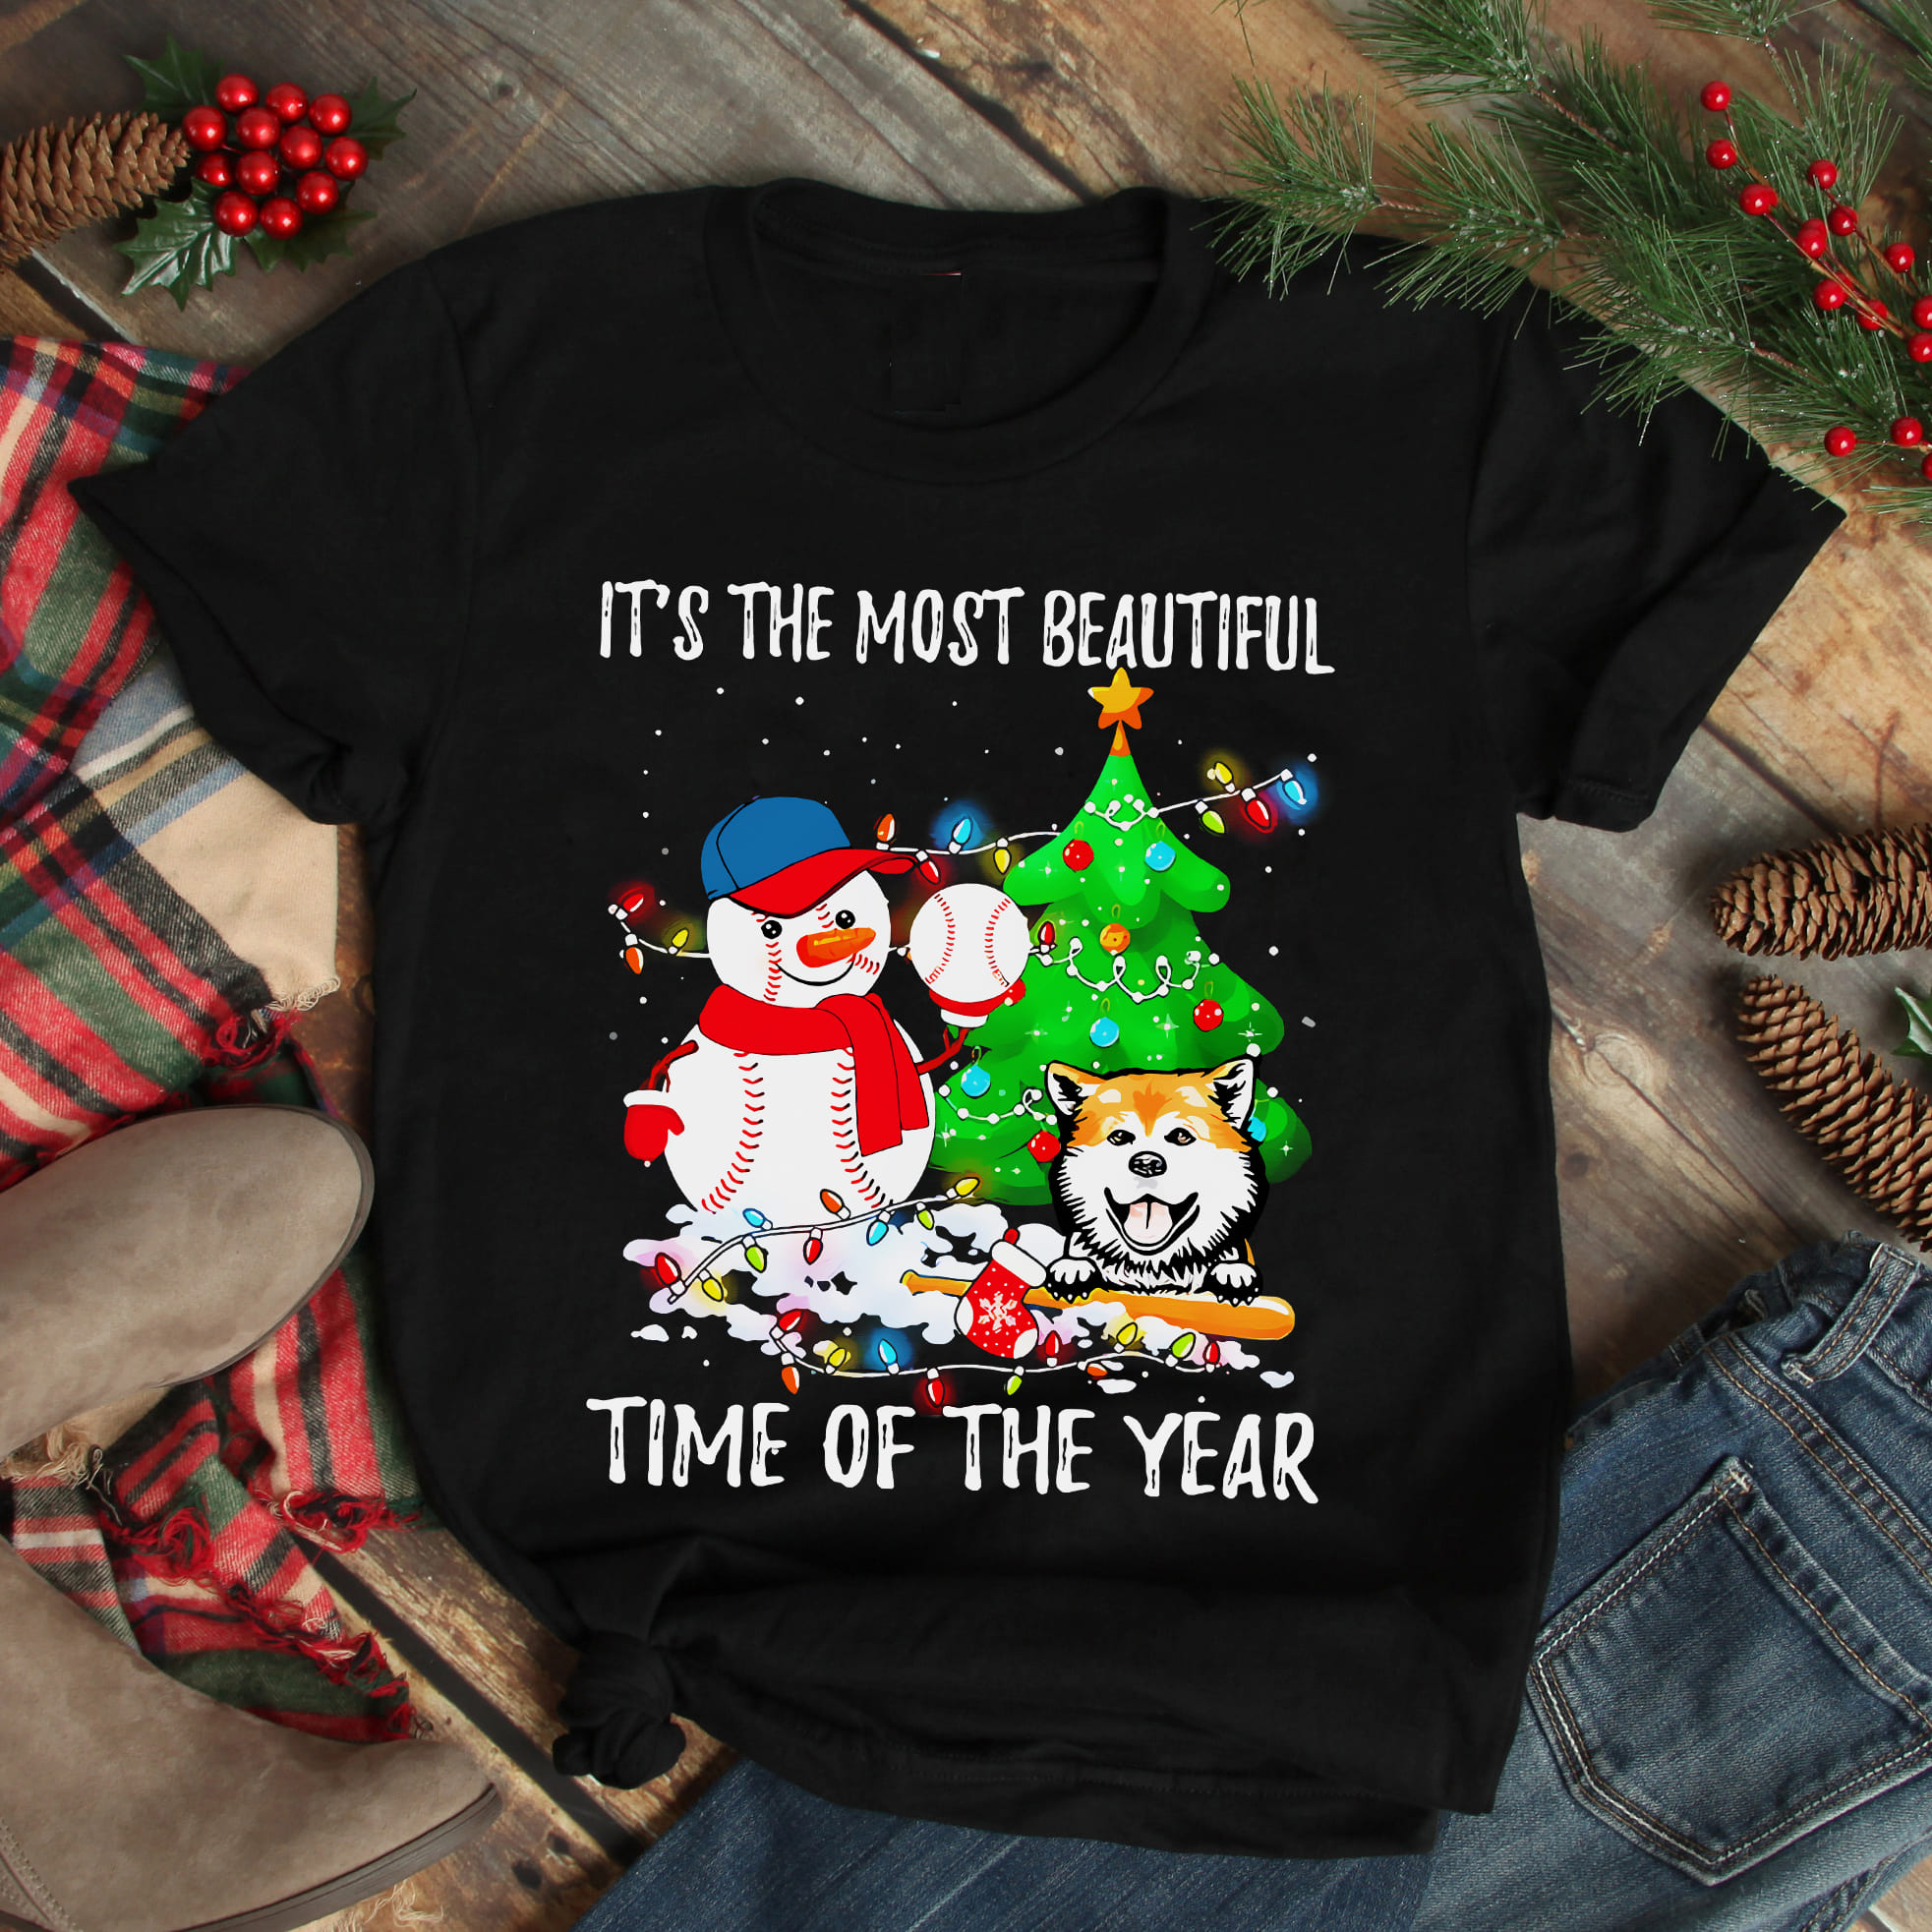 It's the most beautiful time of the year - Snowman baseball, Christmas ugly sweater, gift for baseball player